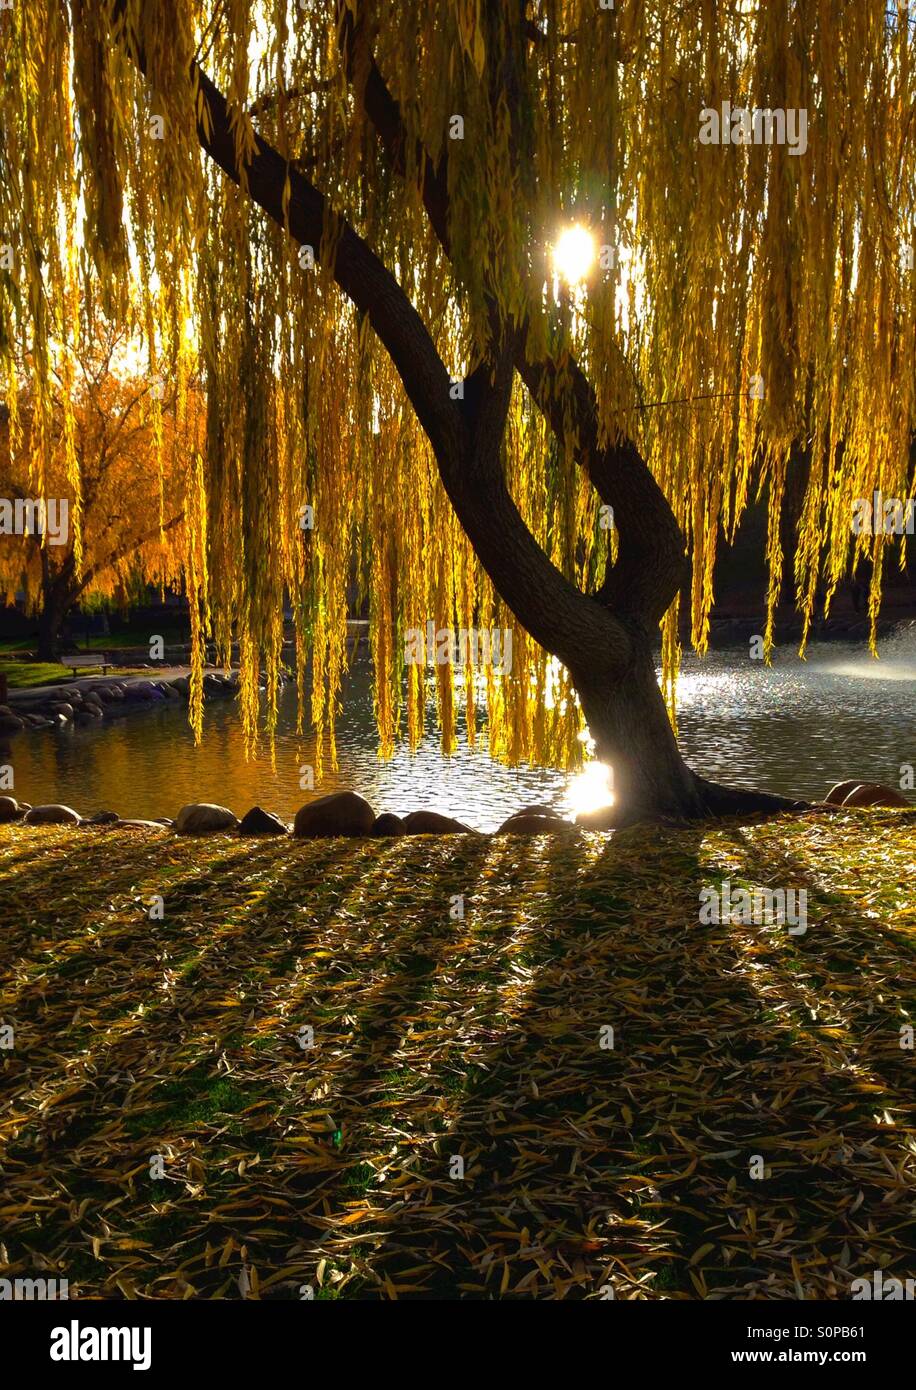 Weeping Willow, Bates Canopy